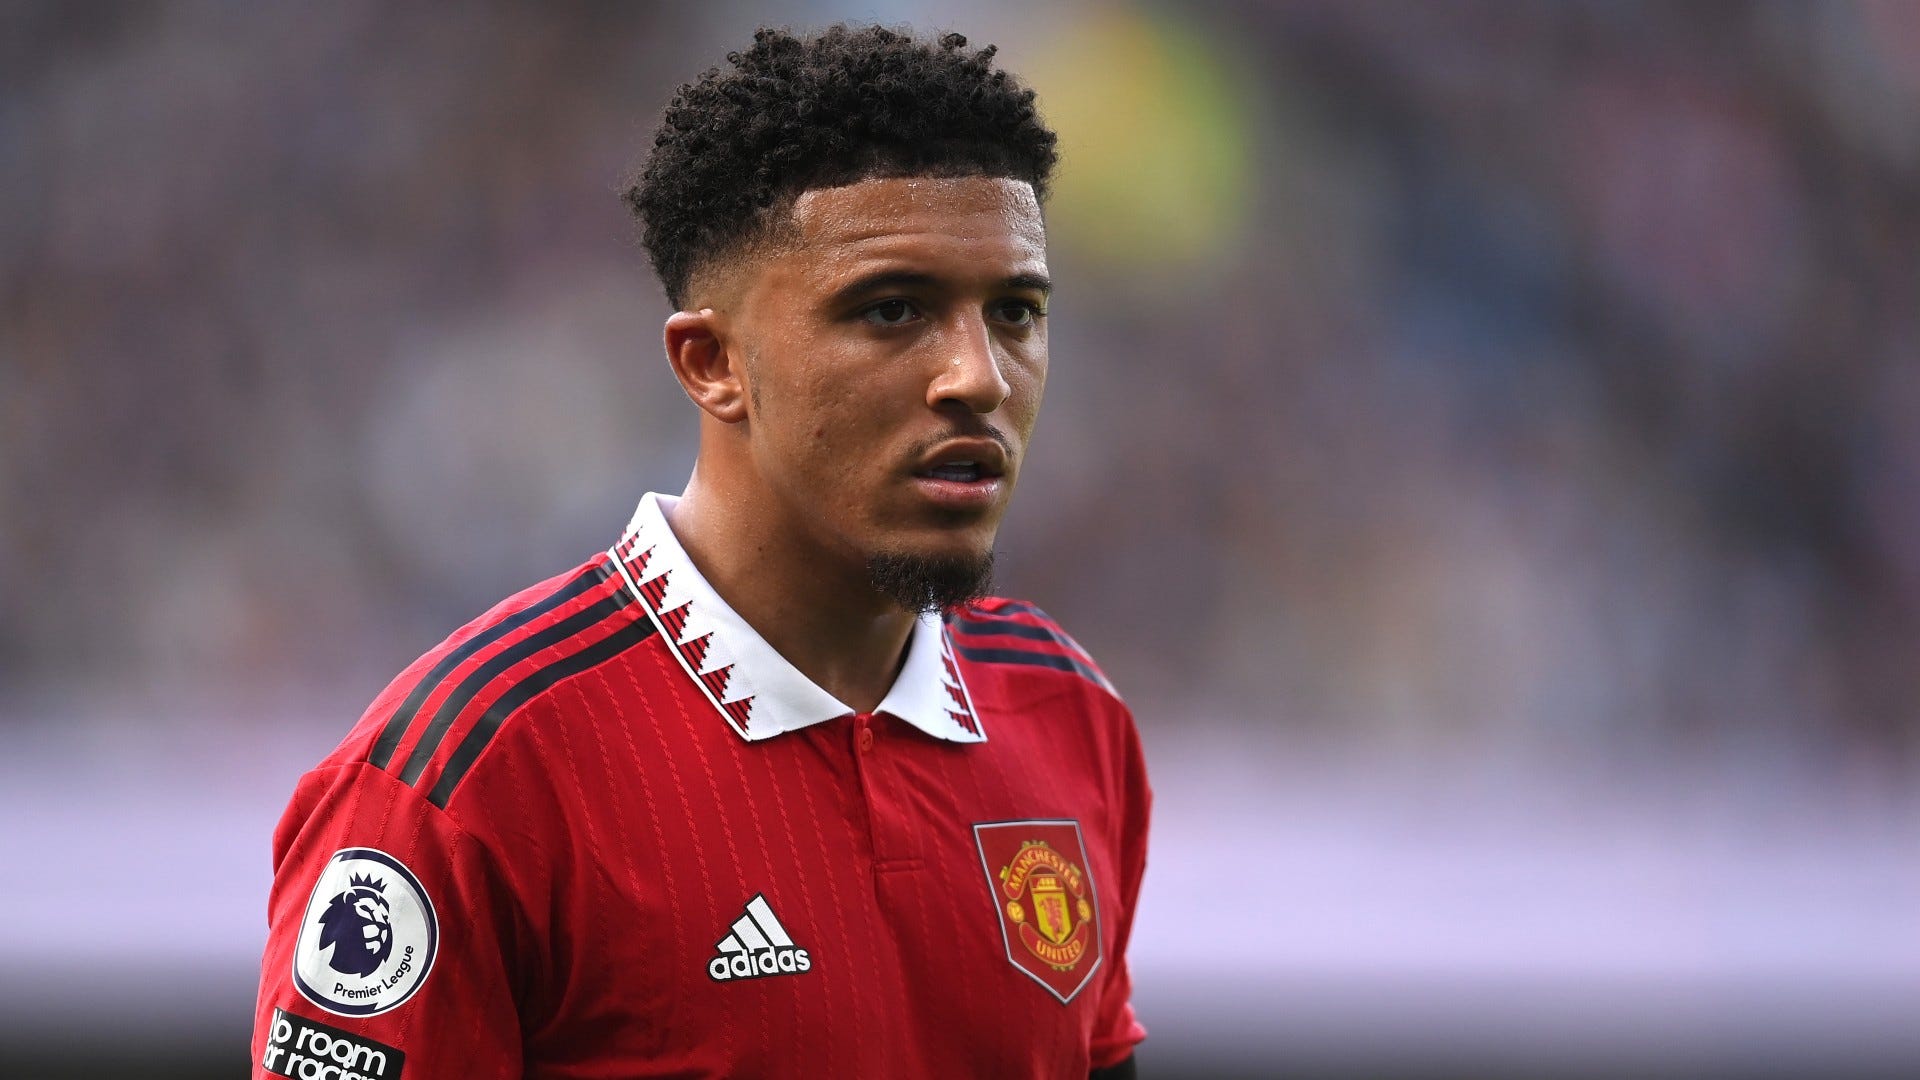 'Nowhere near what everyone thought' - Jadon Sancho told why he's struggling at Man Utd by Paul Scholes